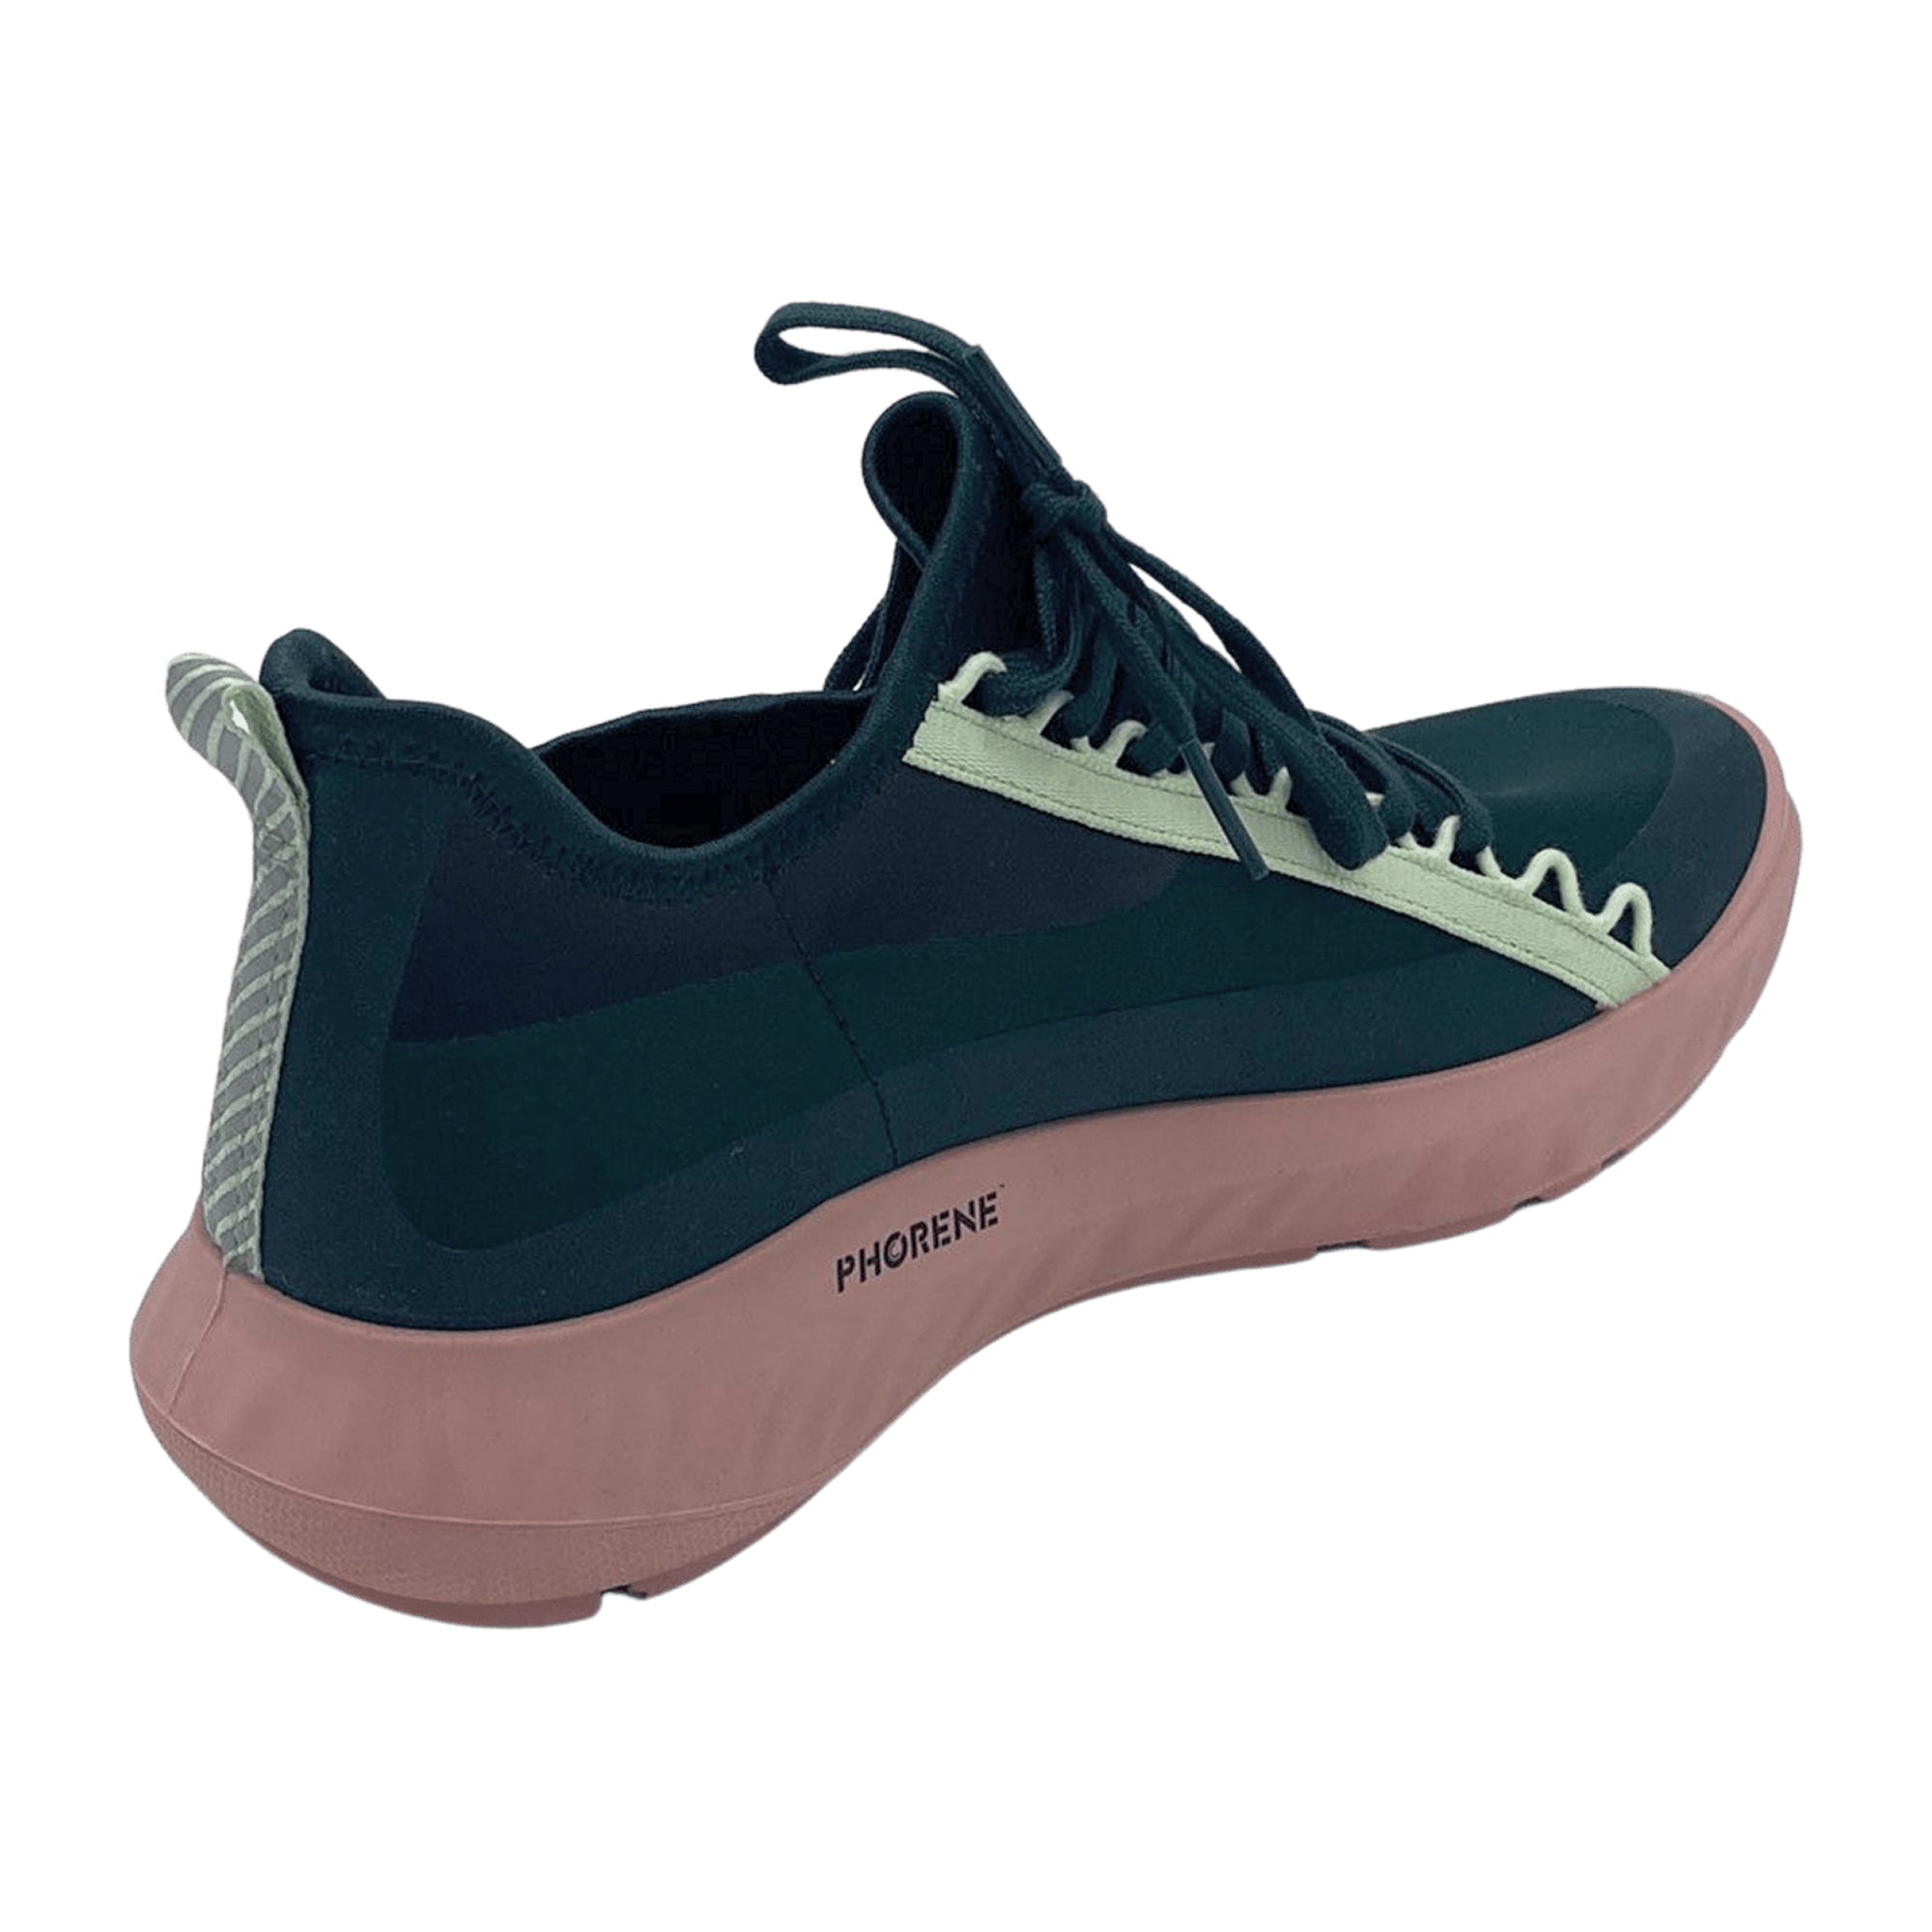 Ecco ATH-1FW Women's Green Athletic Sneakers - Stylish & Lightweight